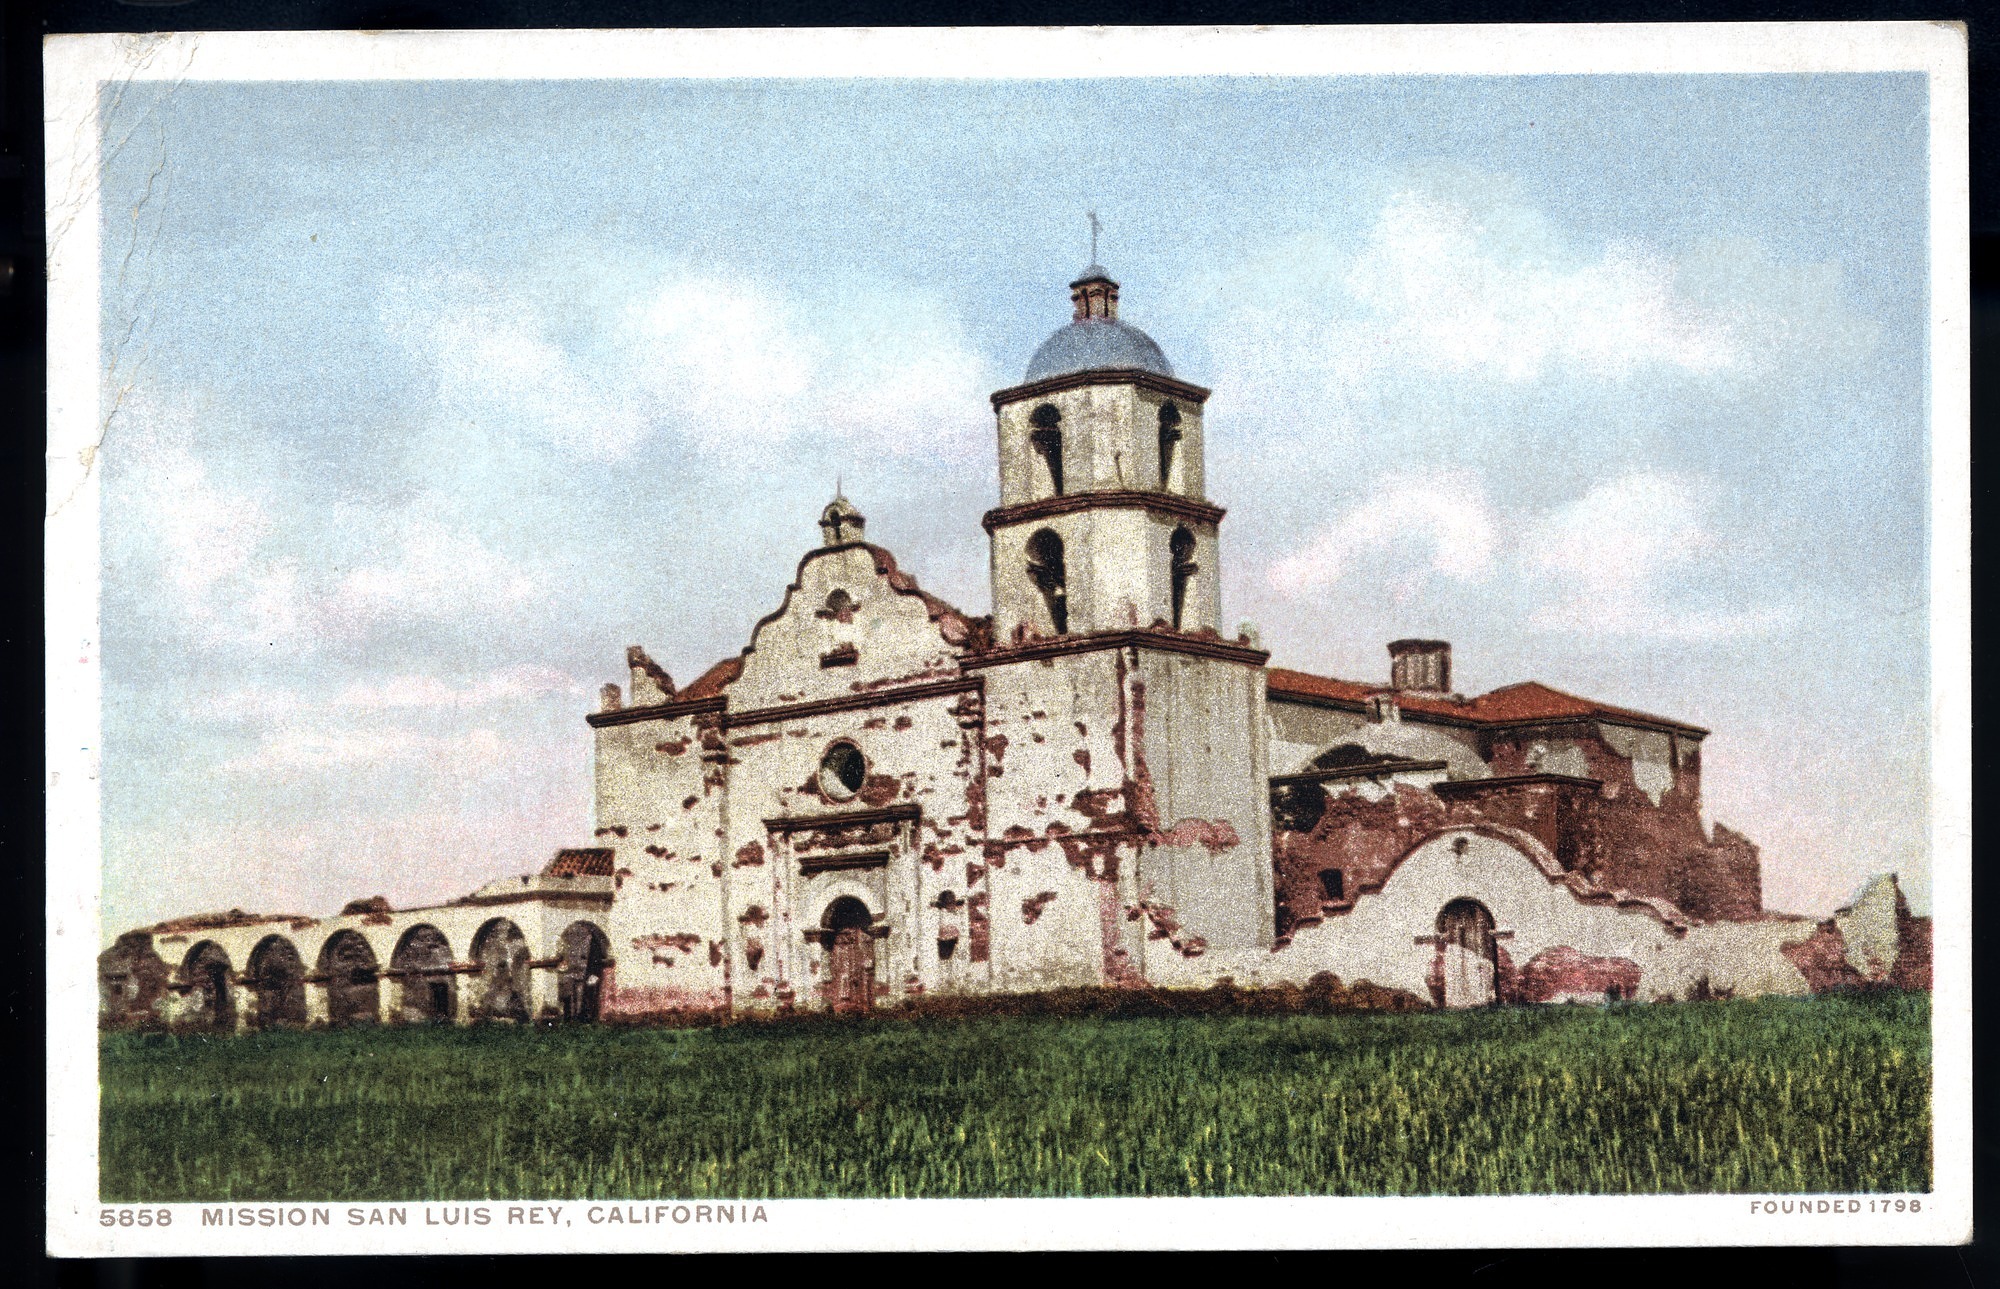 Postcard 57 – Mission San Luis Rey, California. Founded 1798. Detroit Publishing Company. ca 1910. NMAH 1986.0639.2017.